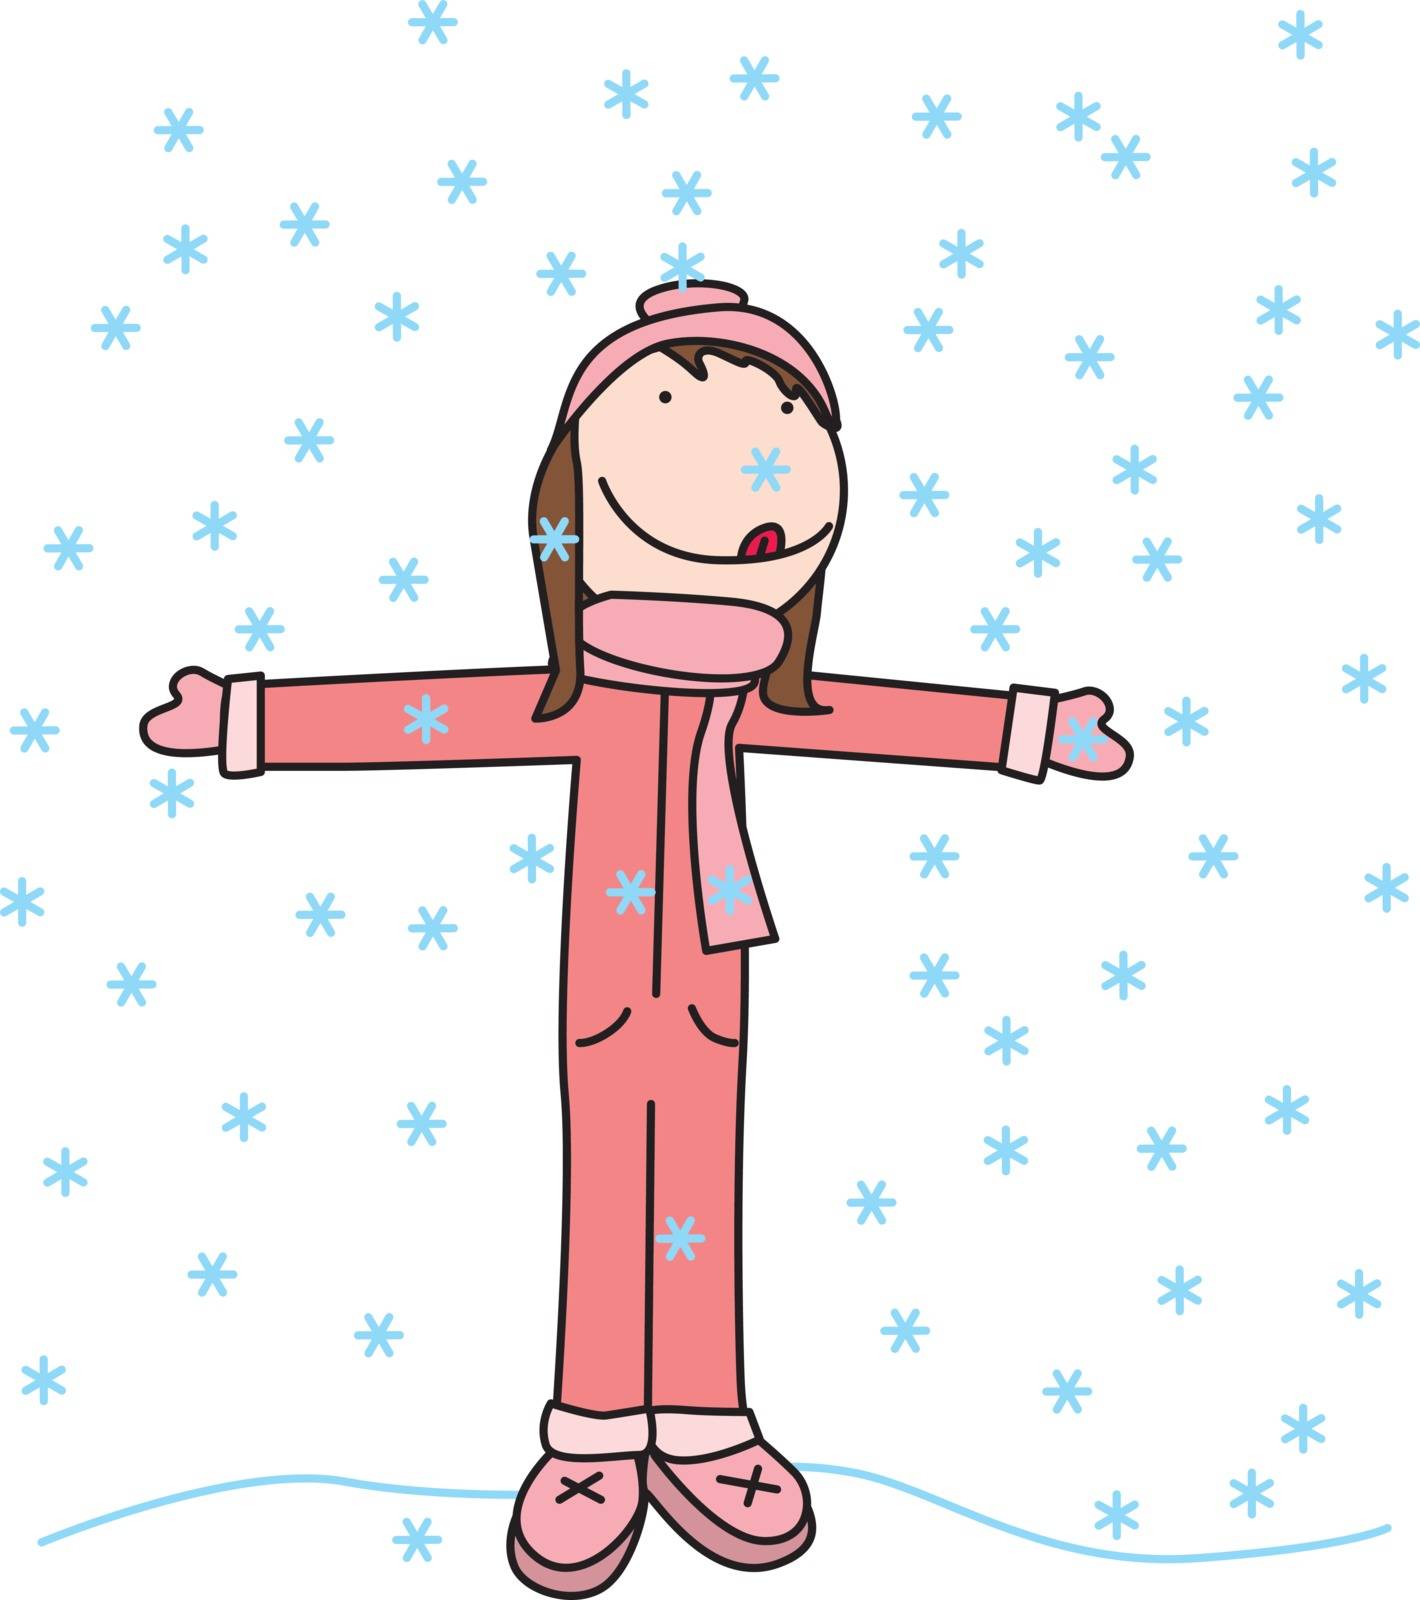 Illustration of happy girl catching snowflakes